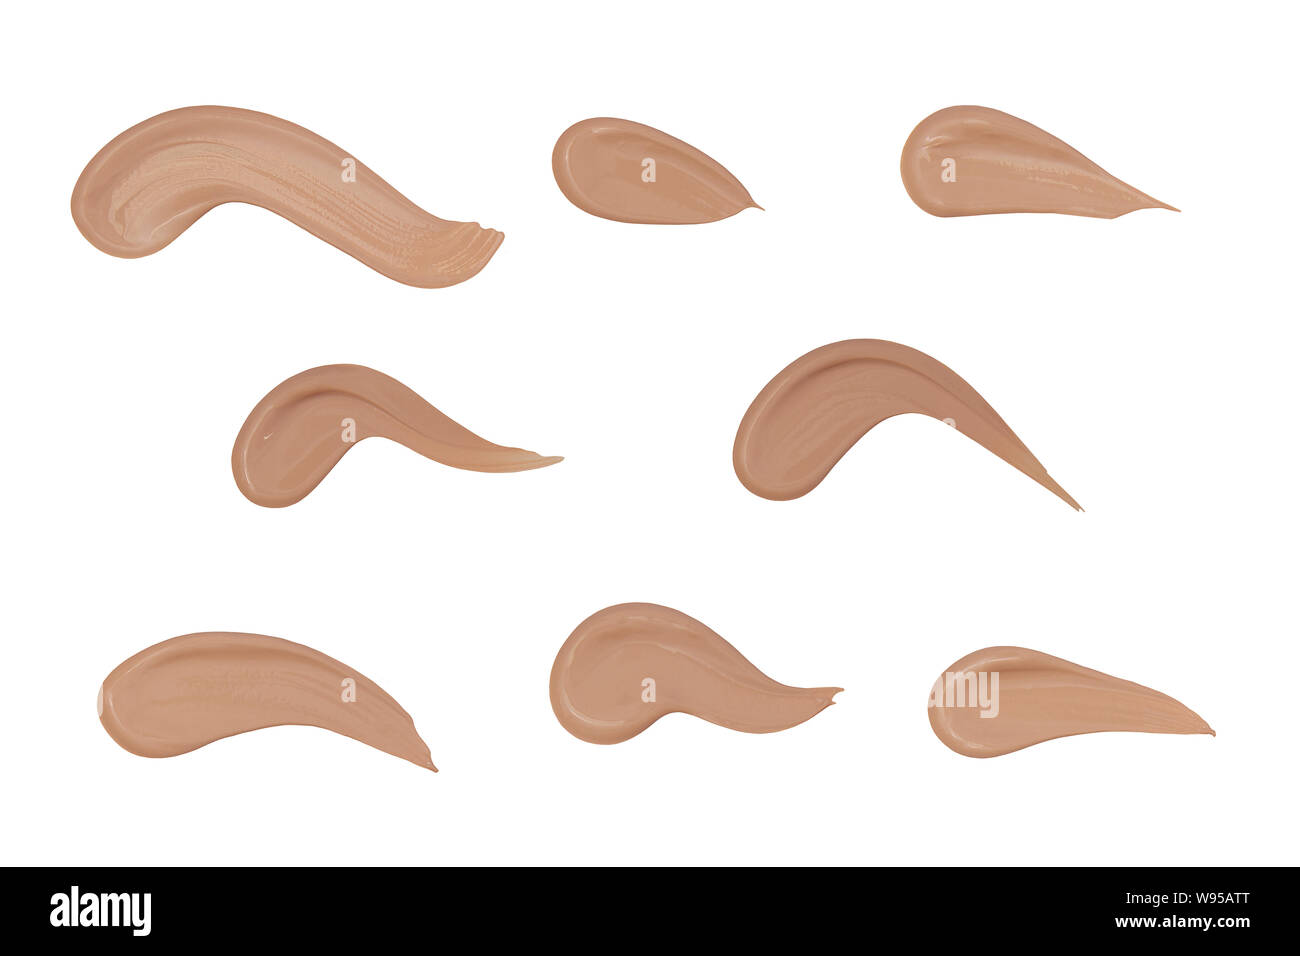 Makeup foundation cream smears isolated and cut out on white background Stock Photo